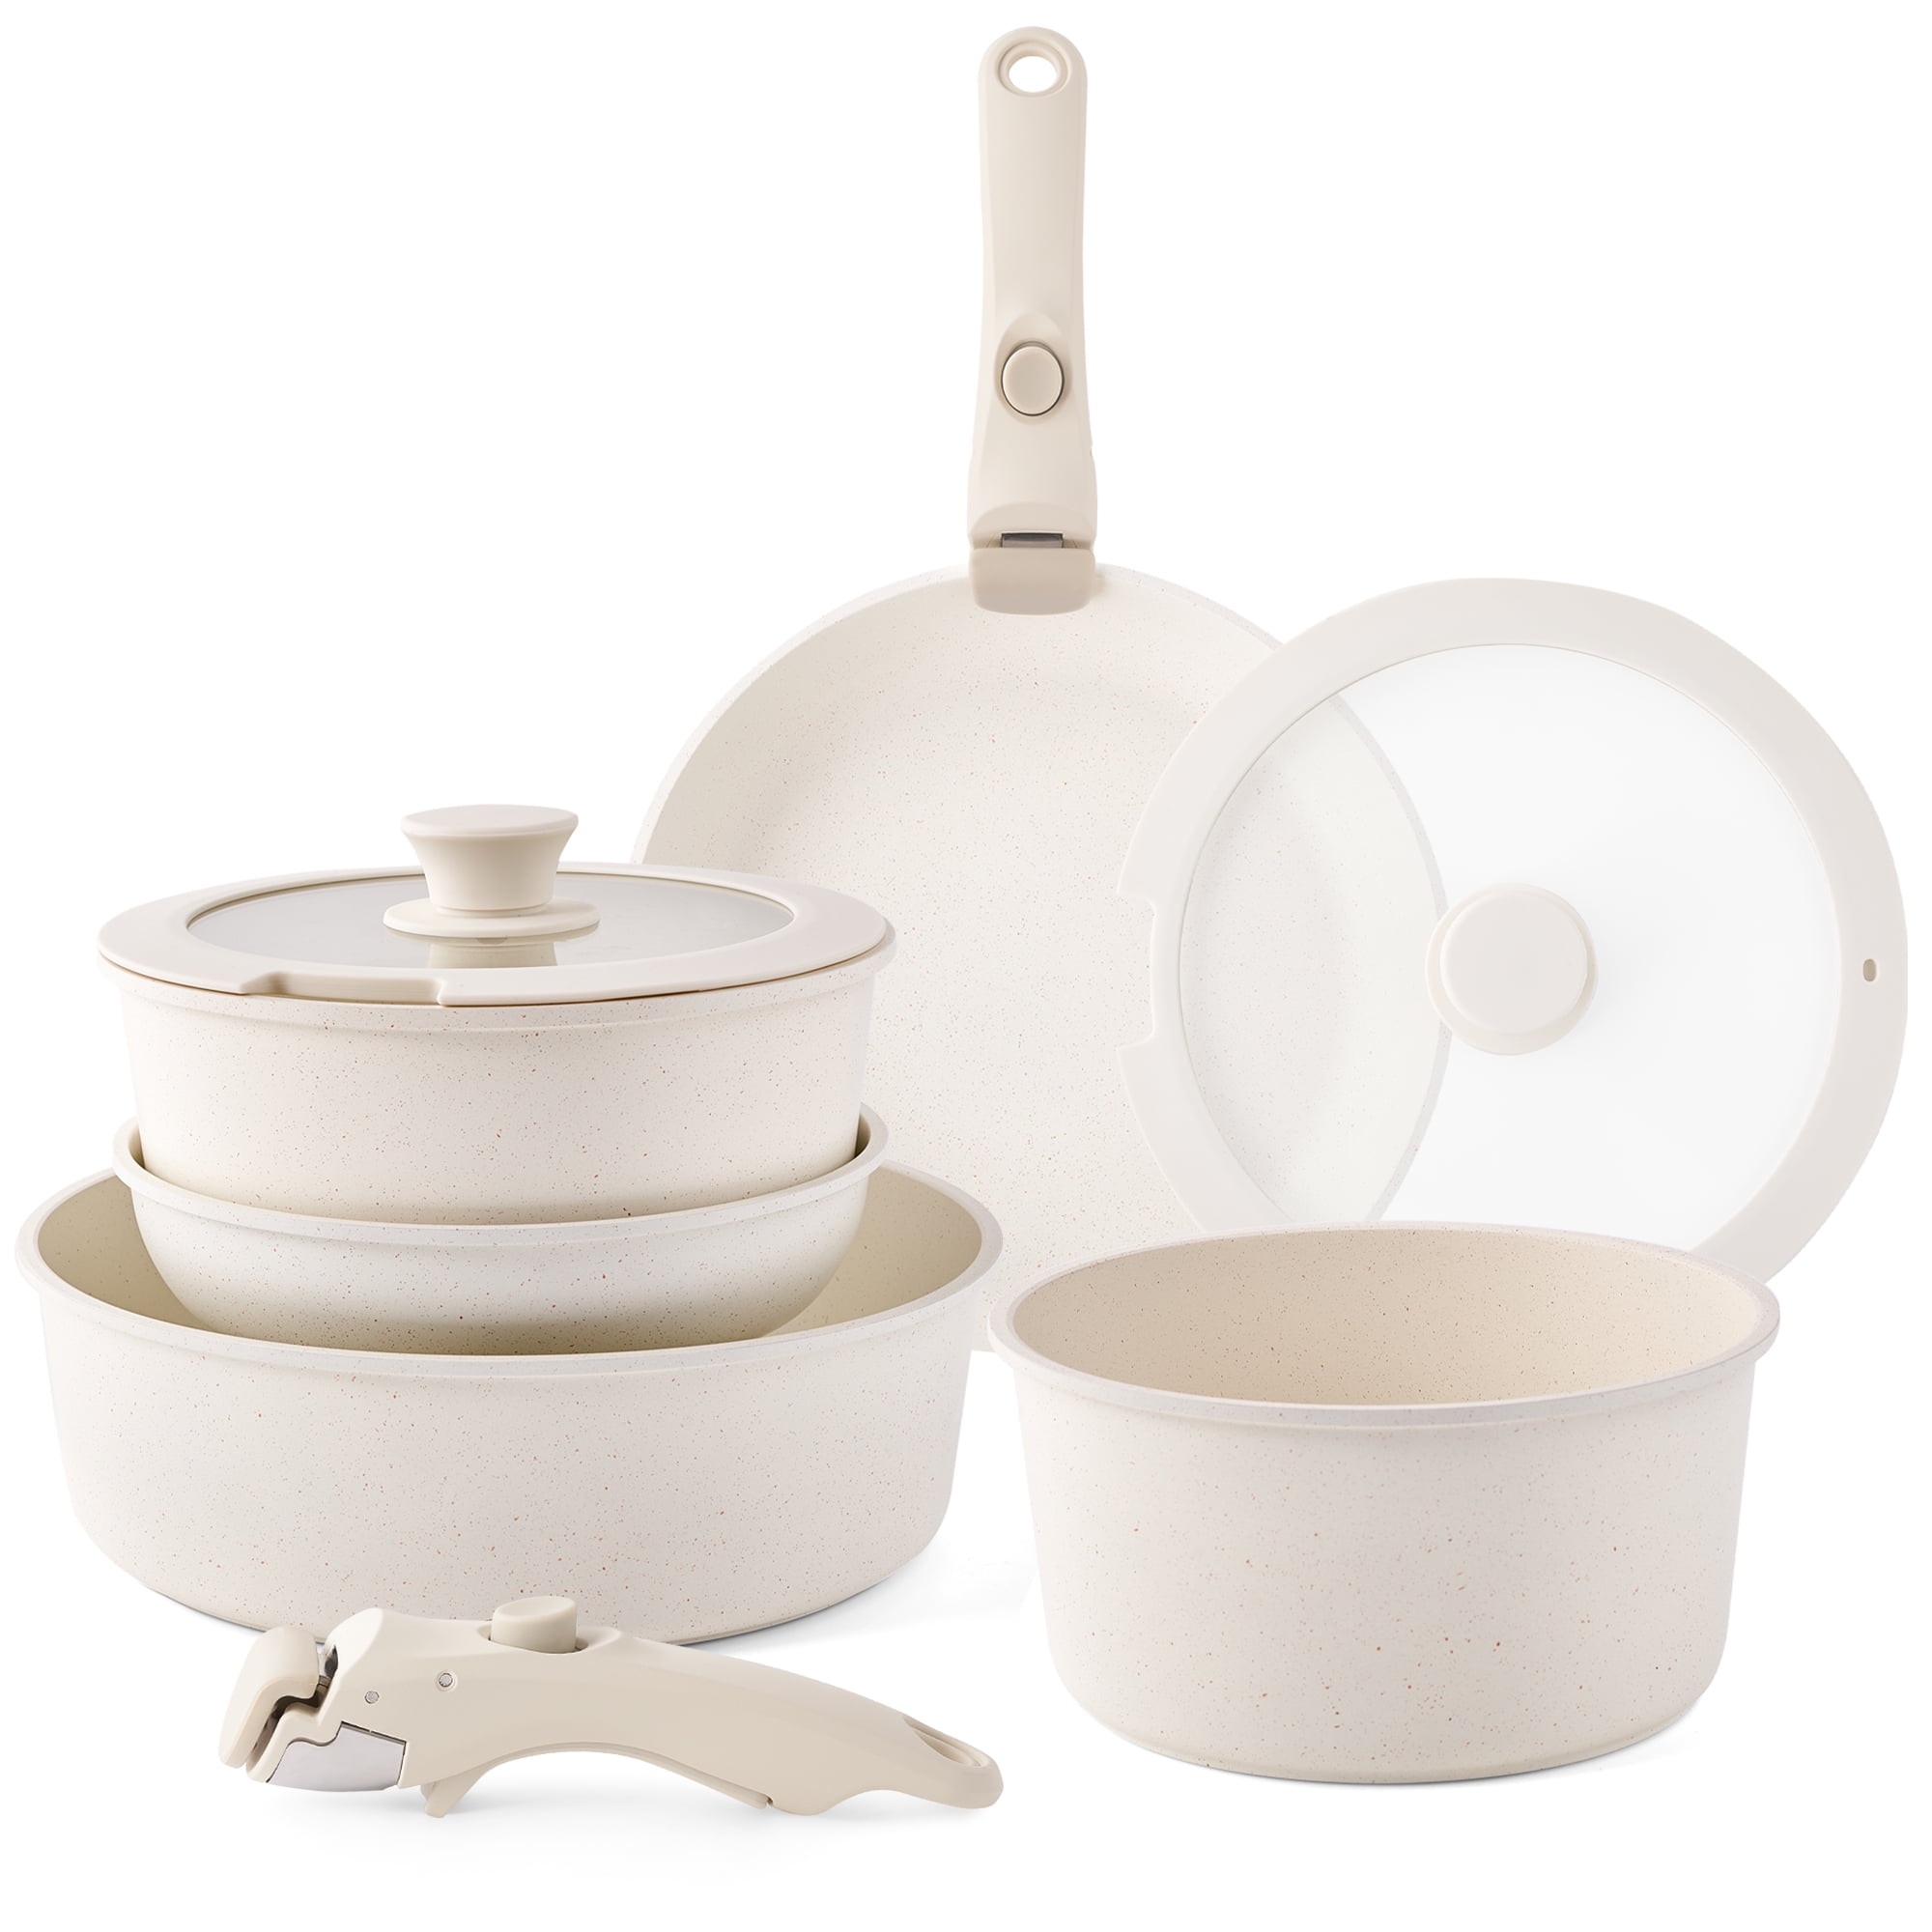 Caannasweis Pots and Pans Set Nonstick, Detachable Handle Cookware Sets,  Stackable Induction Kitchen Cookware with Removable Handle, Non Stick RV  and Camping Cookware, Dishwasher and Oven Safe, Beige